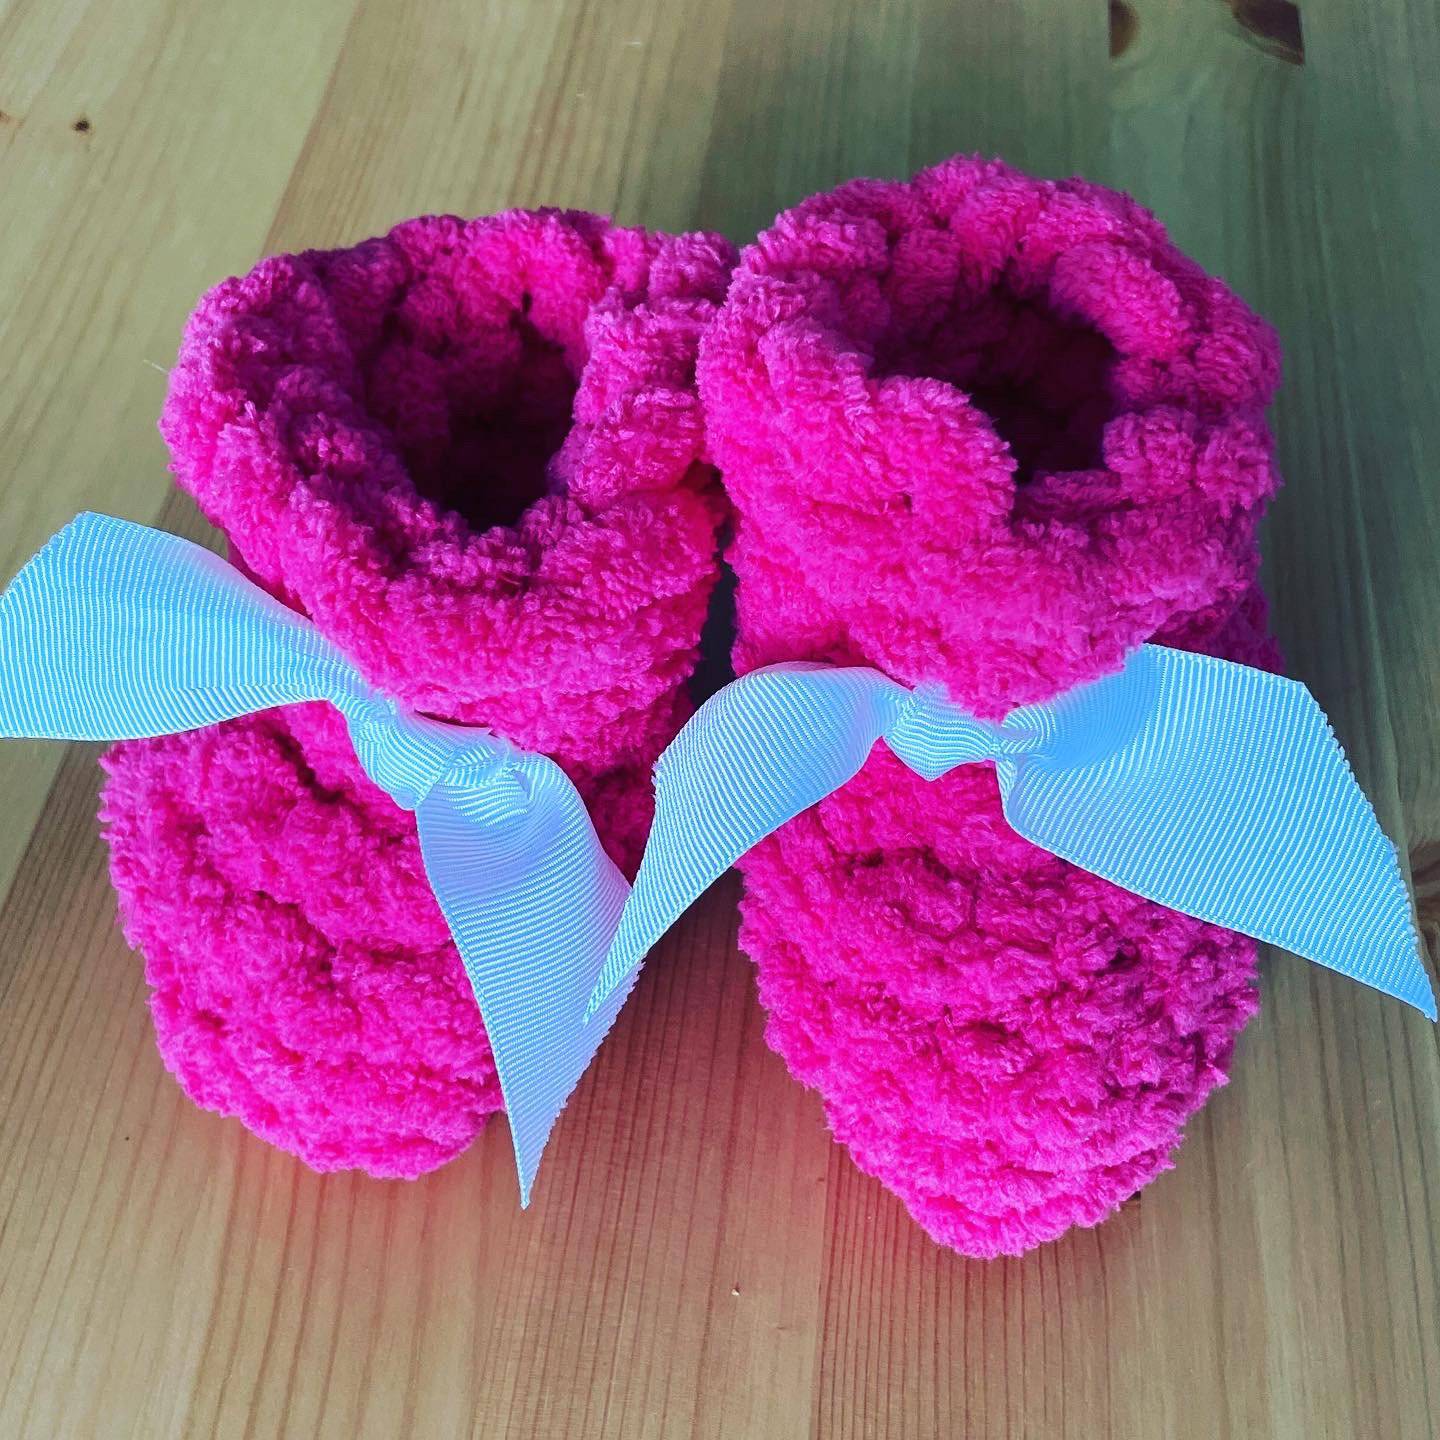 Chenille bootie slippers with bow detail, pink, small (S). Colour: pink.  Size: s